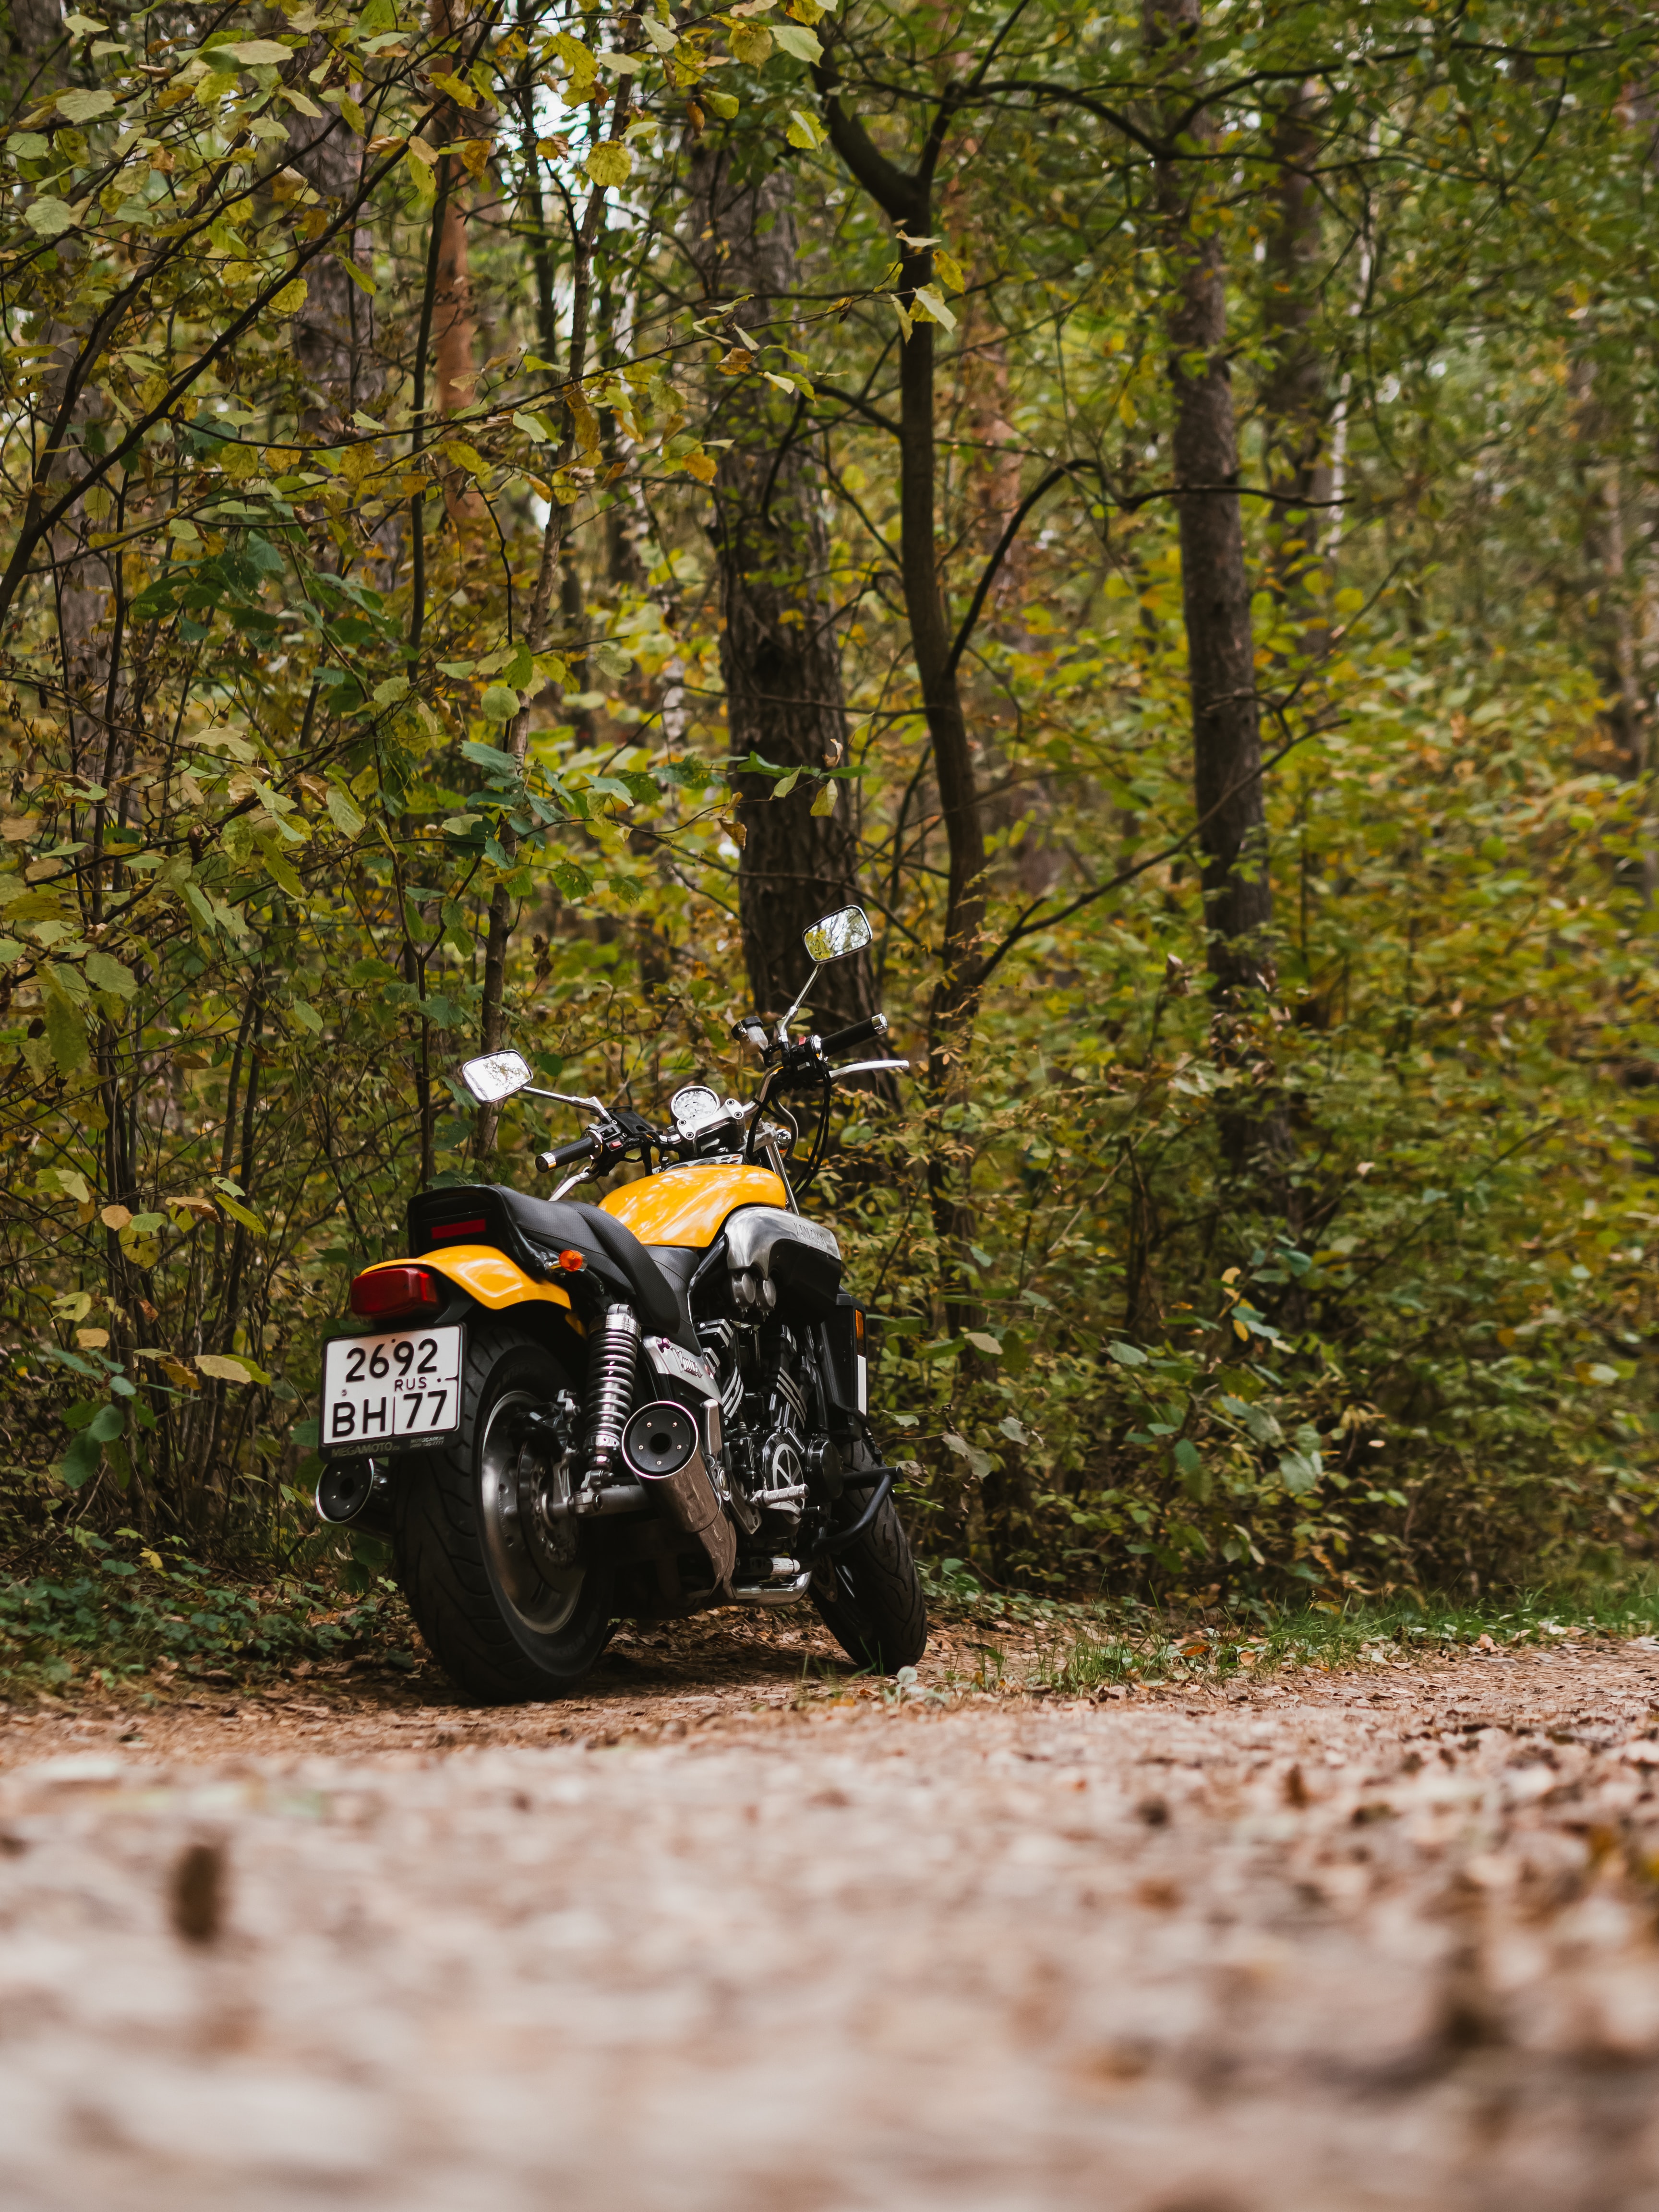 rear view, motor, bike, yamaha, motorcycle, motorcycles, forest, back view